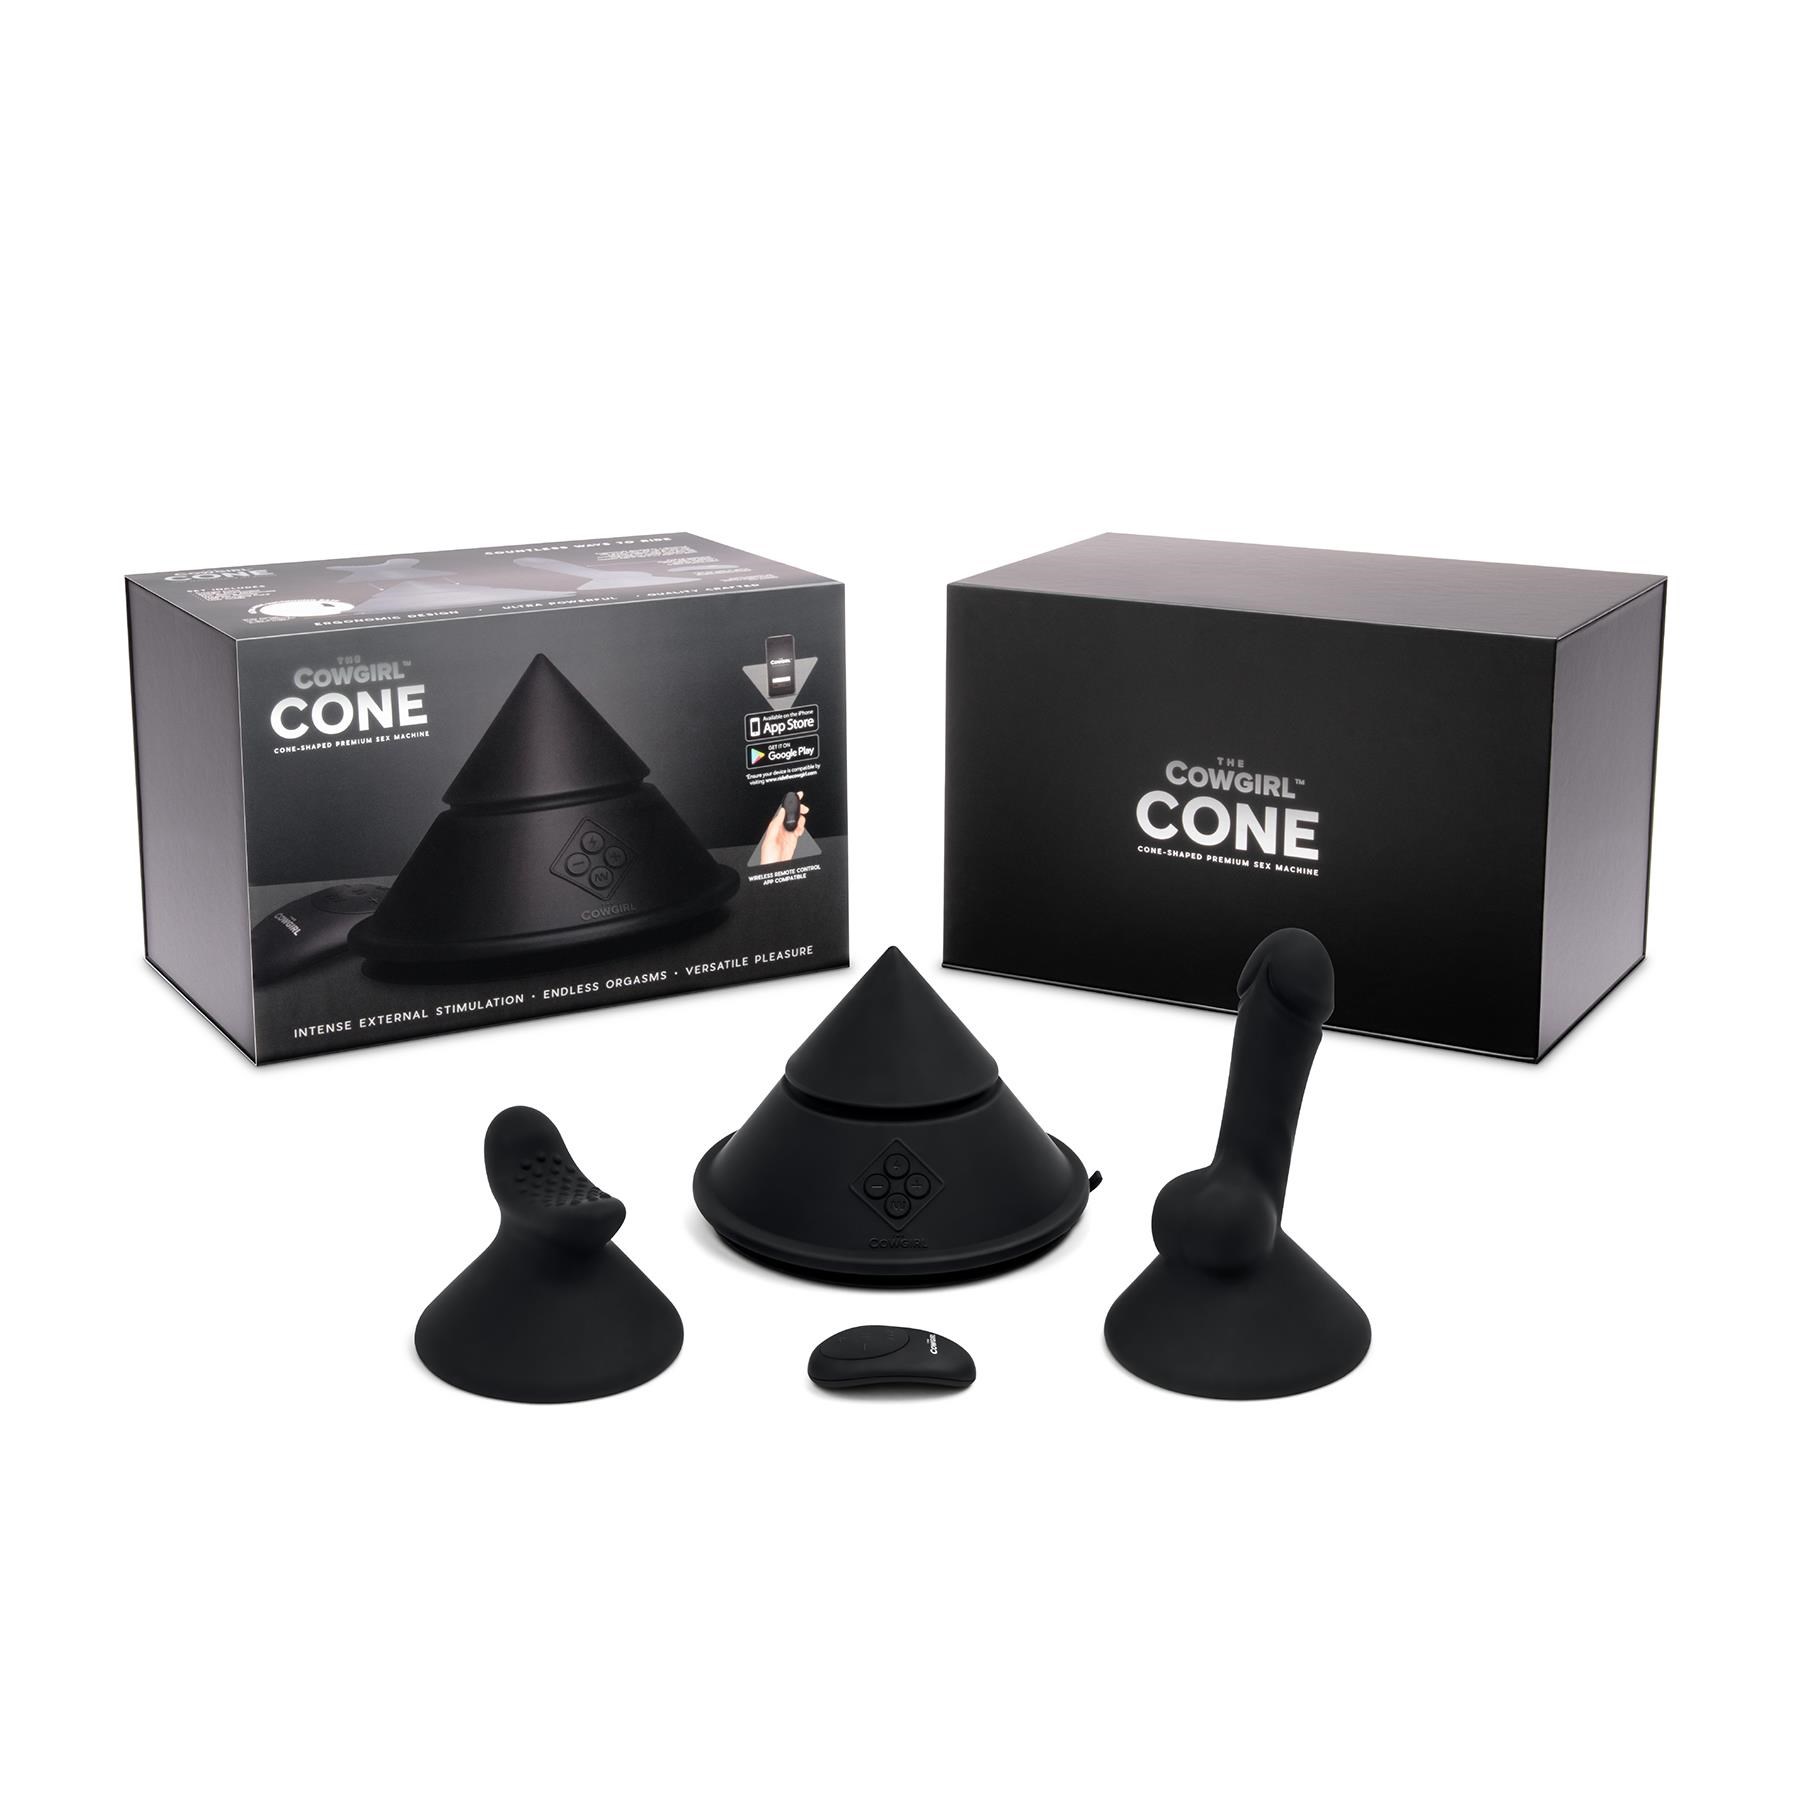 The Cowgirl Cone Sex Machine - Product and Packaging